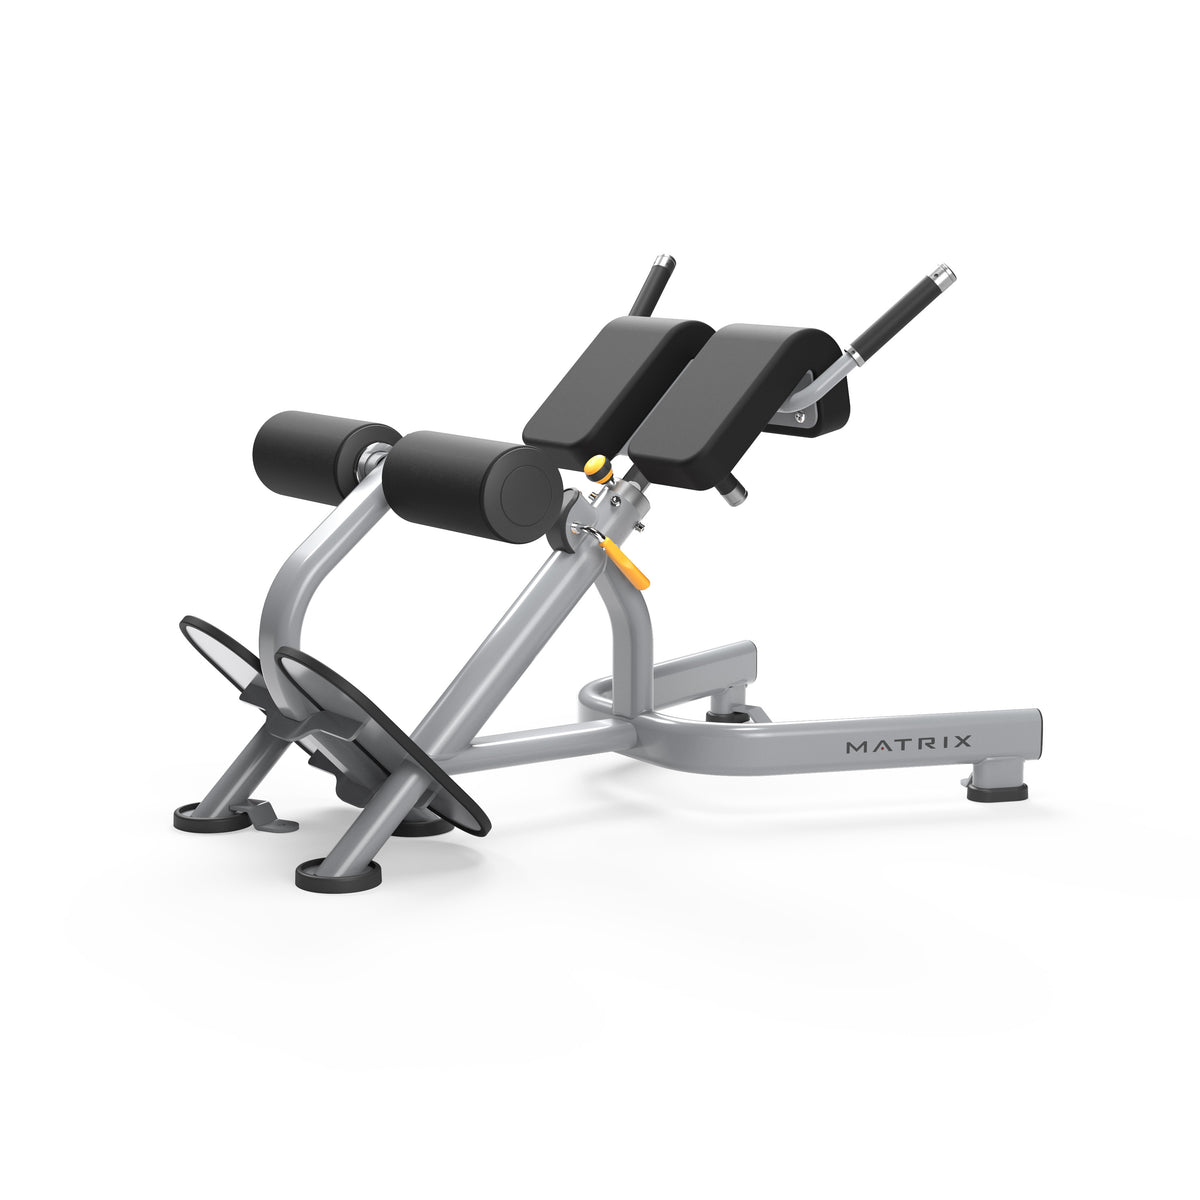 Matrix Fitness Magnum Back Extension Bench full view | Fitness Experience